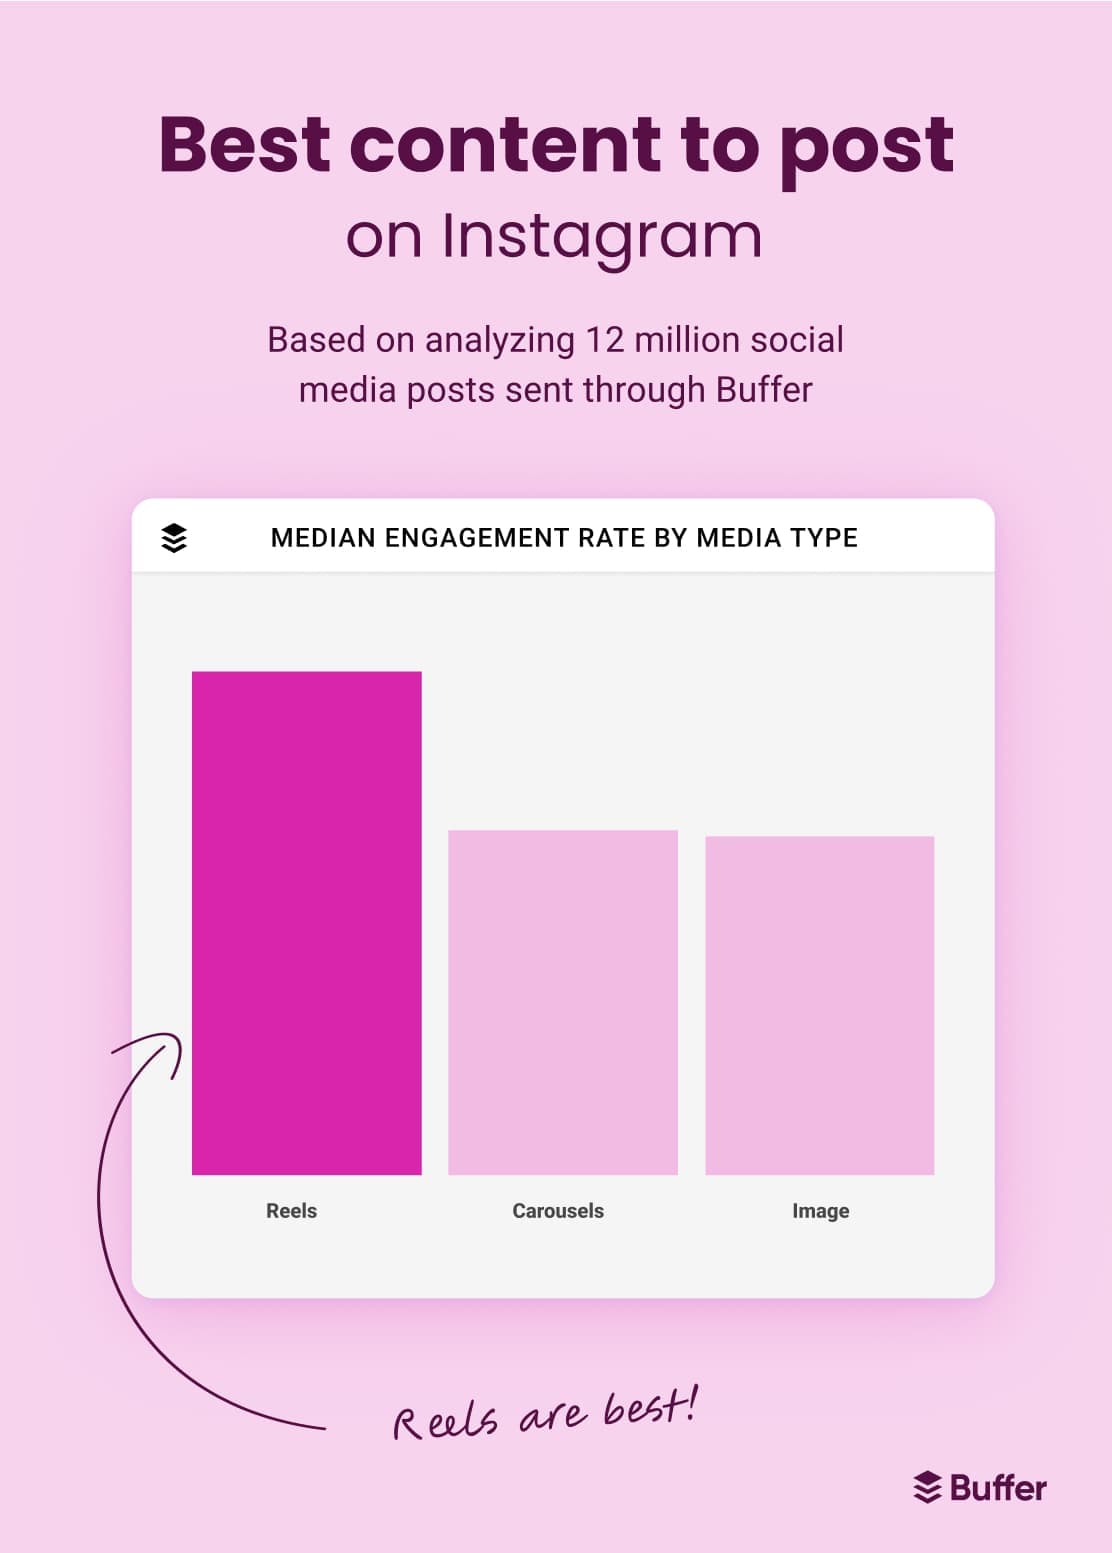 Bar chart of the best content to post on Instagram based on analyzing 1 million social media posts sent through Buffer displaying Reels as the best content type, next carousels, and closely followed by image.